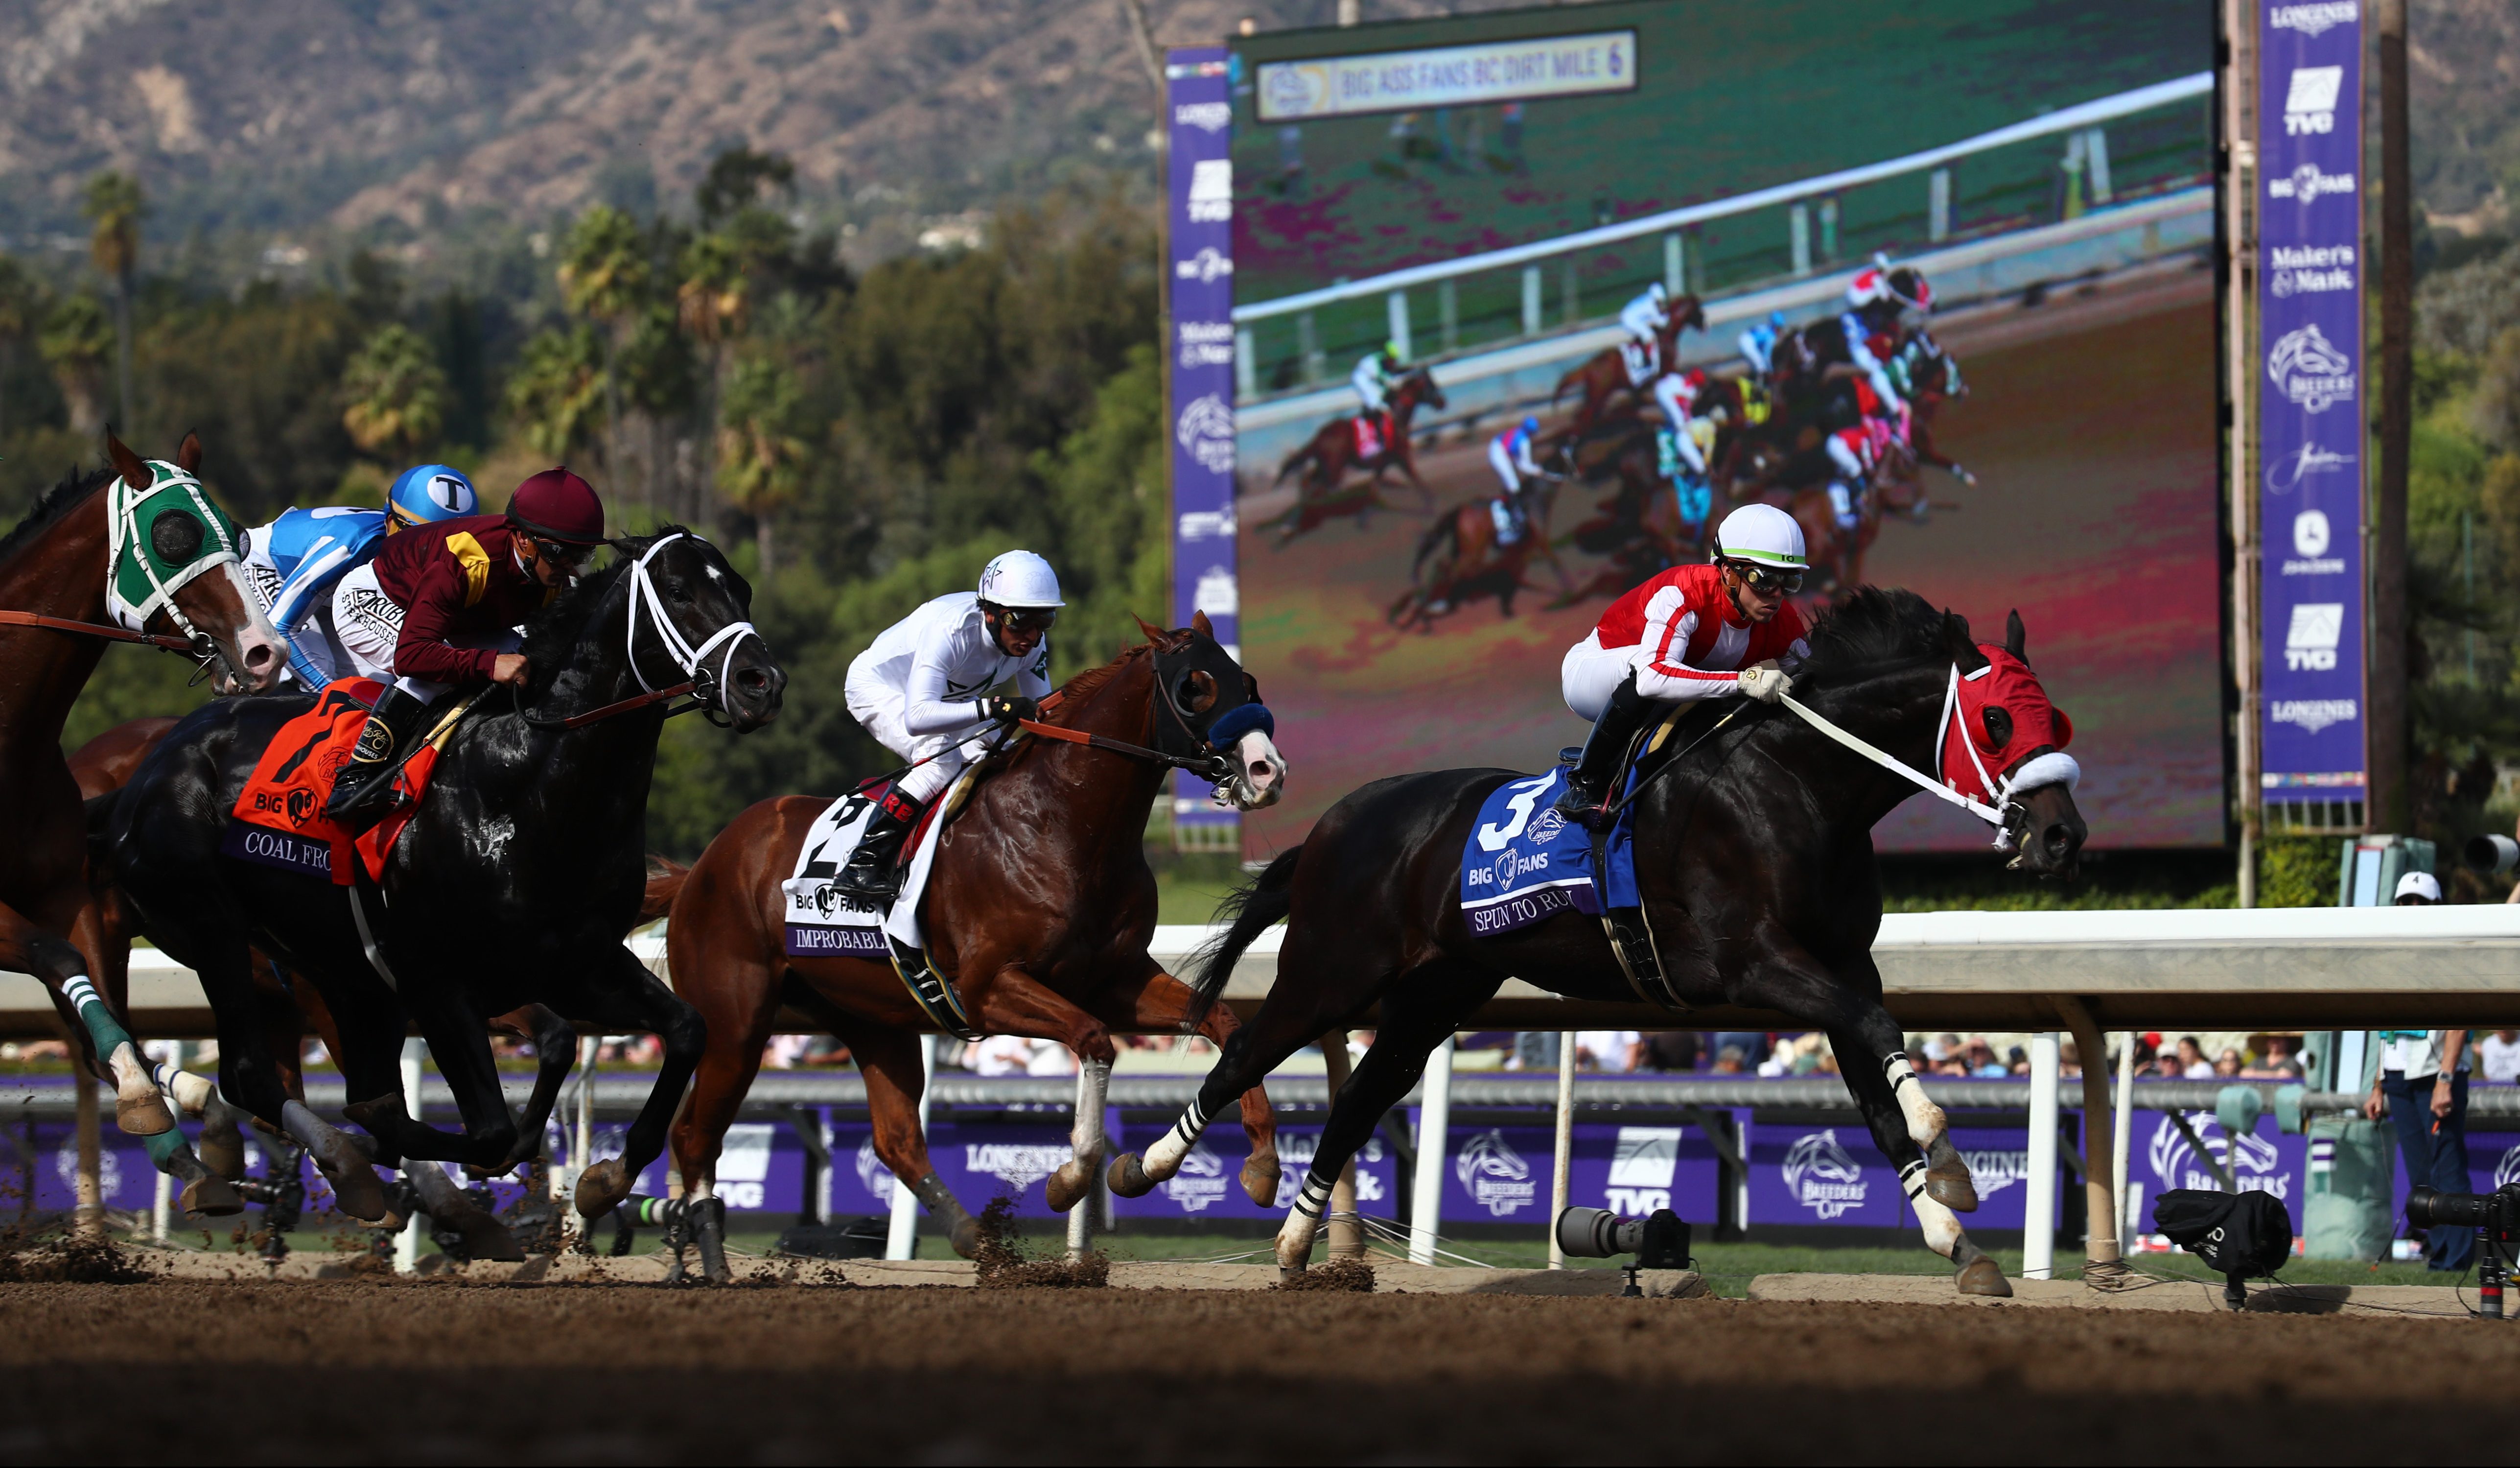 How to Watch All Breeders’ Cup 2020 Races Online